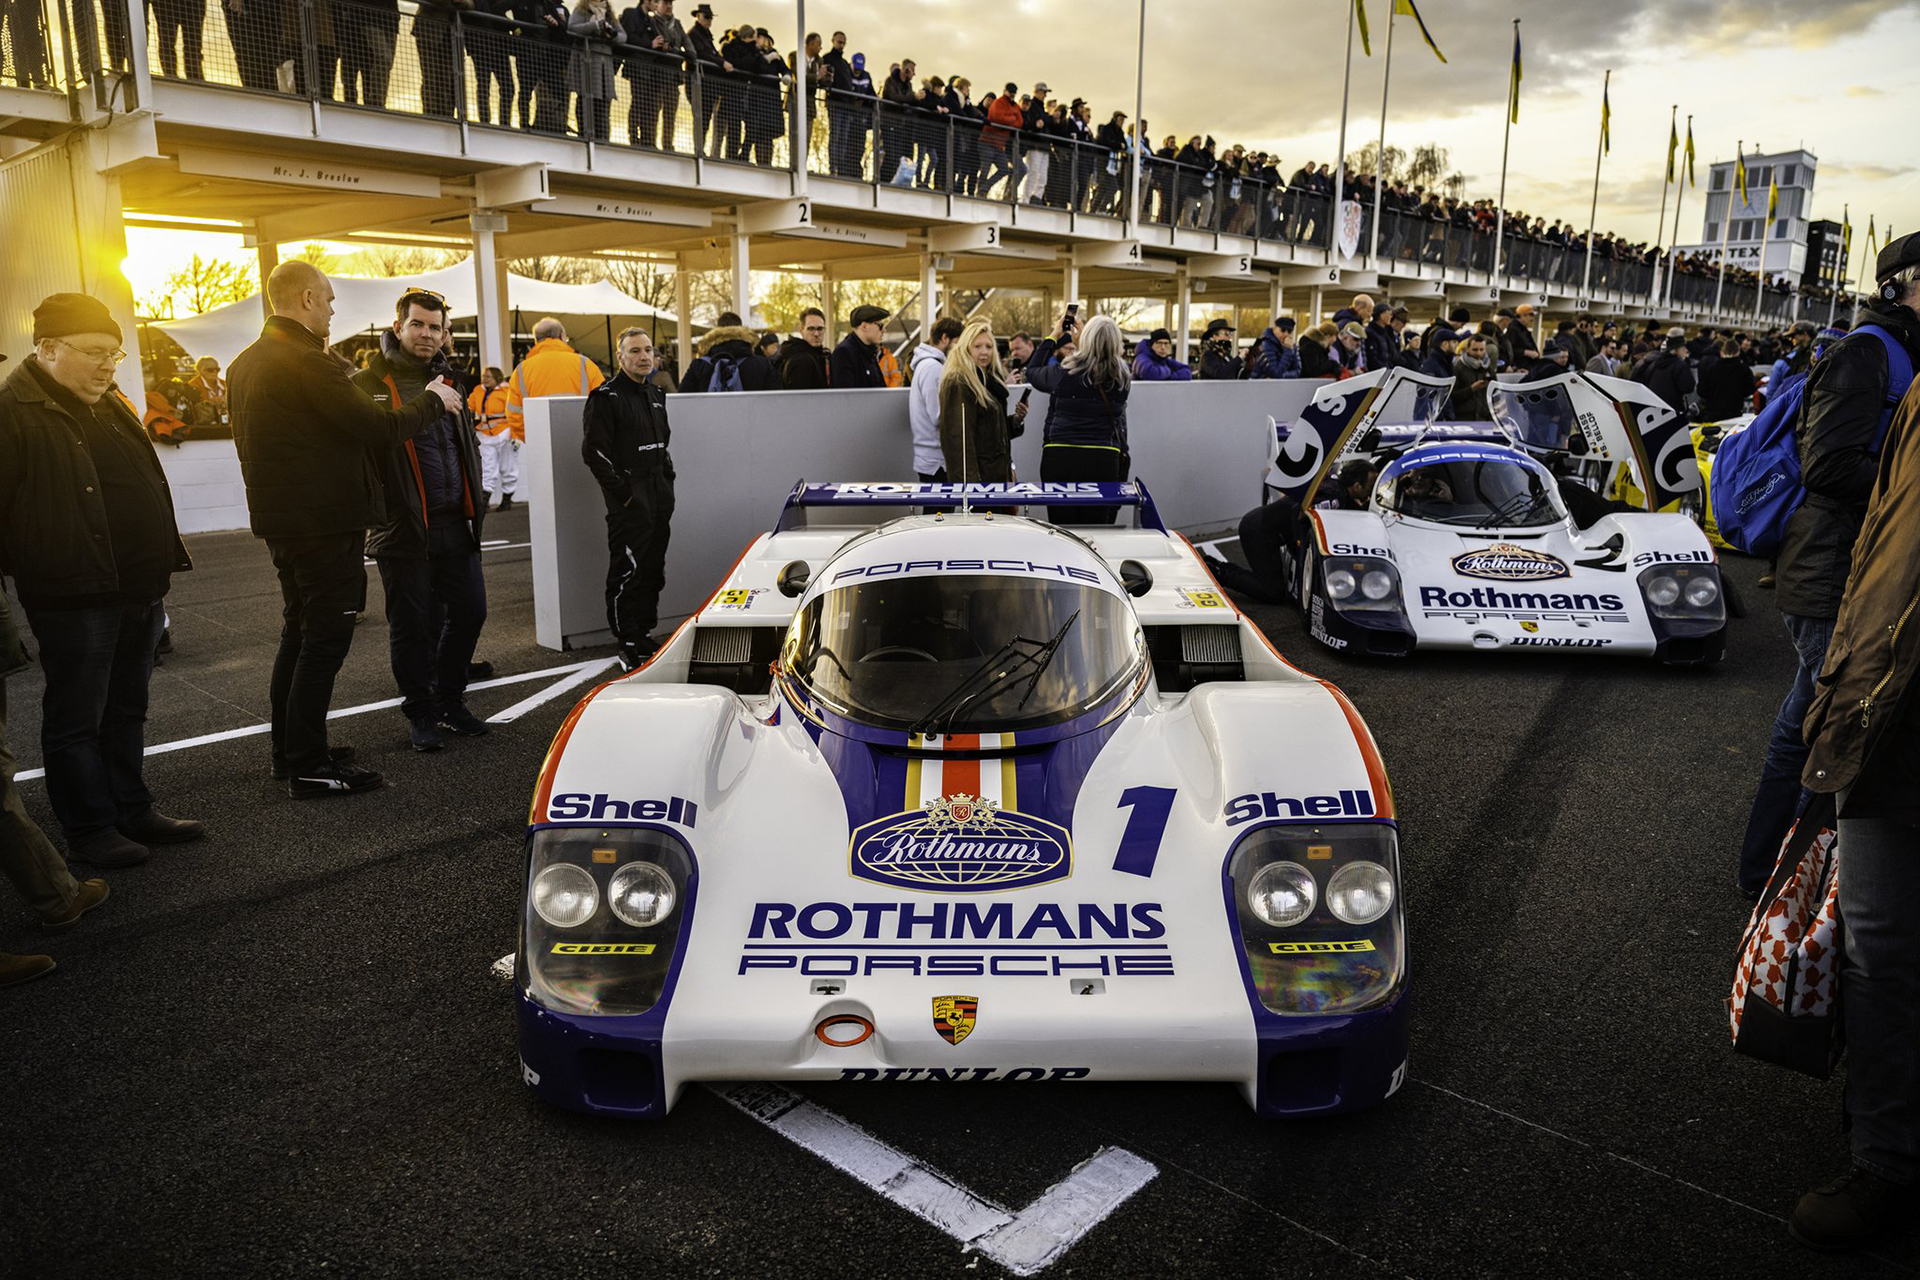 A beauty the Porsche of the 24 Hours Le Mans of the eighties.  The German brand is the most successful in the legendary endurance race (@GoodwoodRRC)